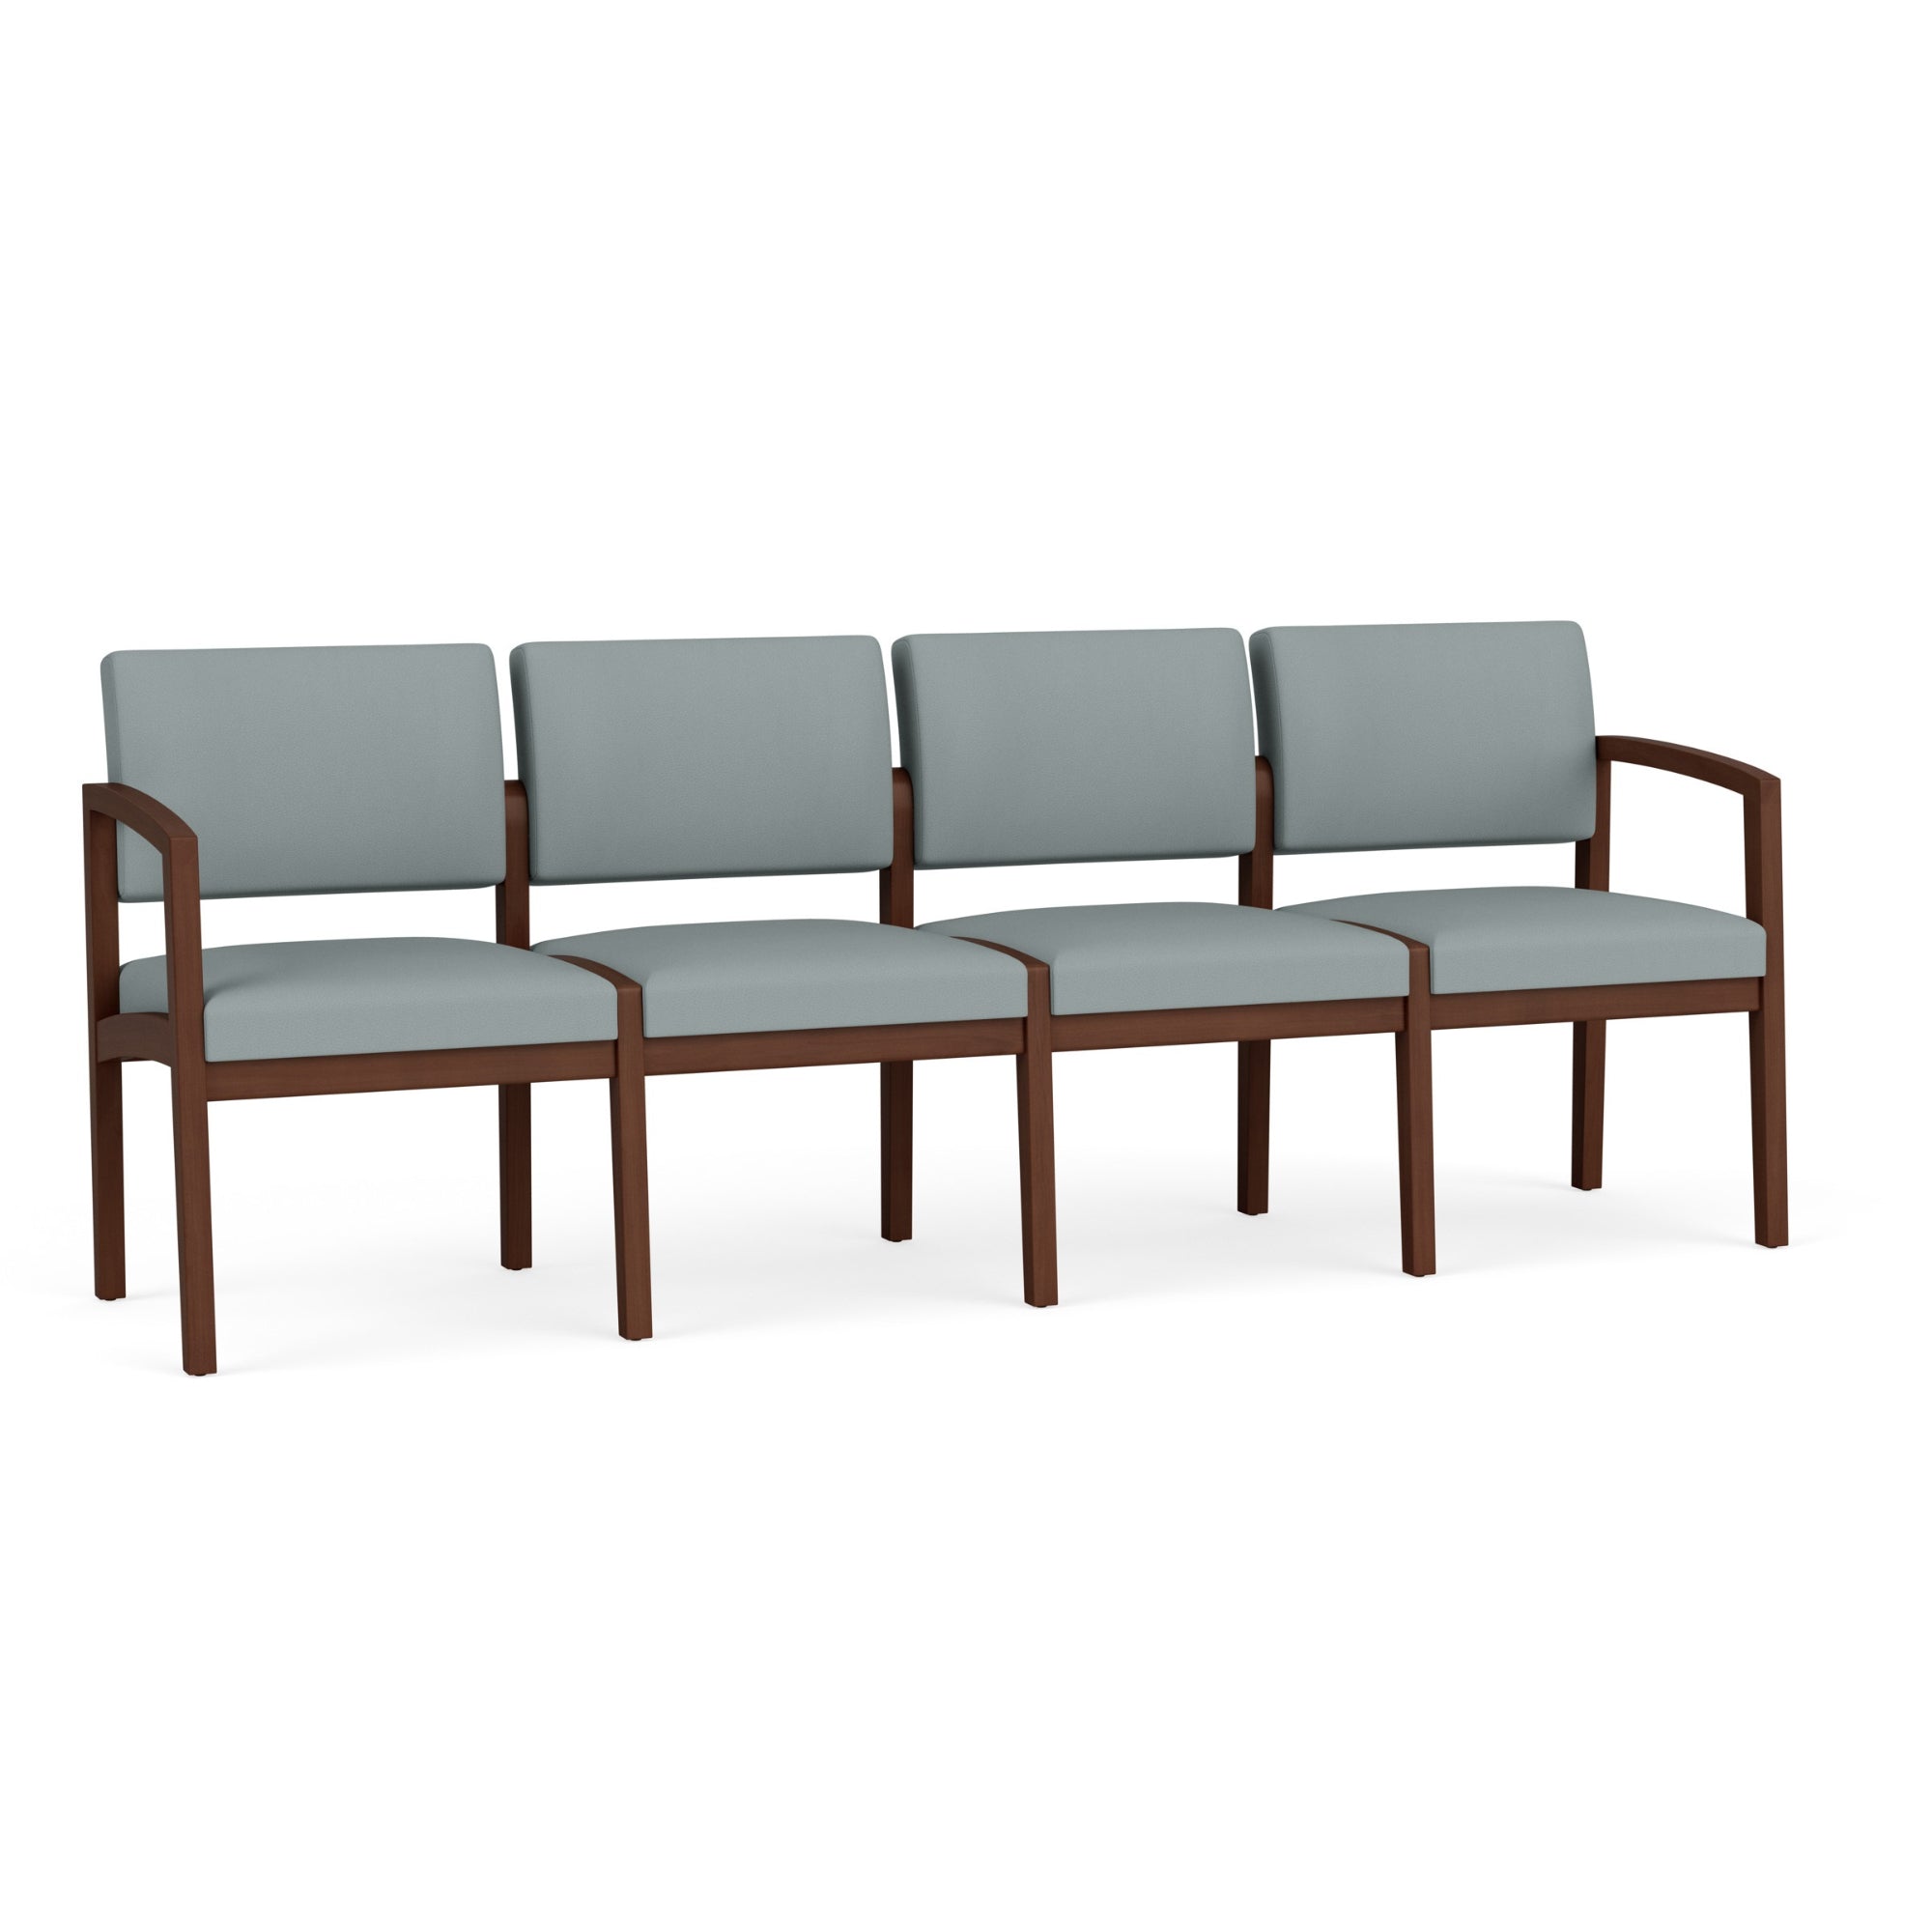 Lenox Wood Collection Reception Seating, 4 Seat Sofa, Standard Fabric Upholstery, FREE SHIPPING